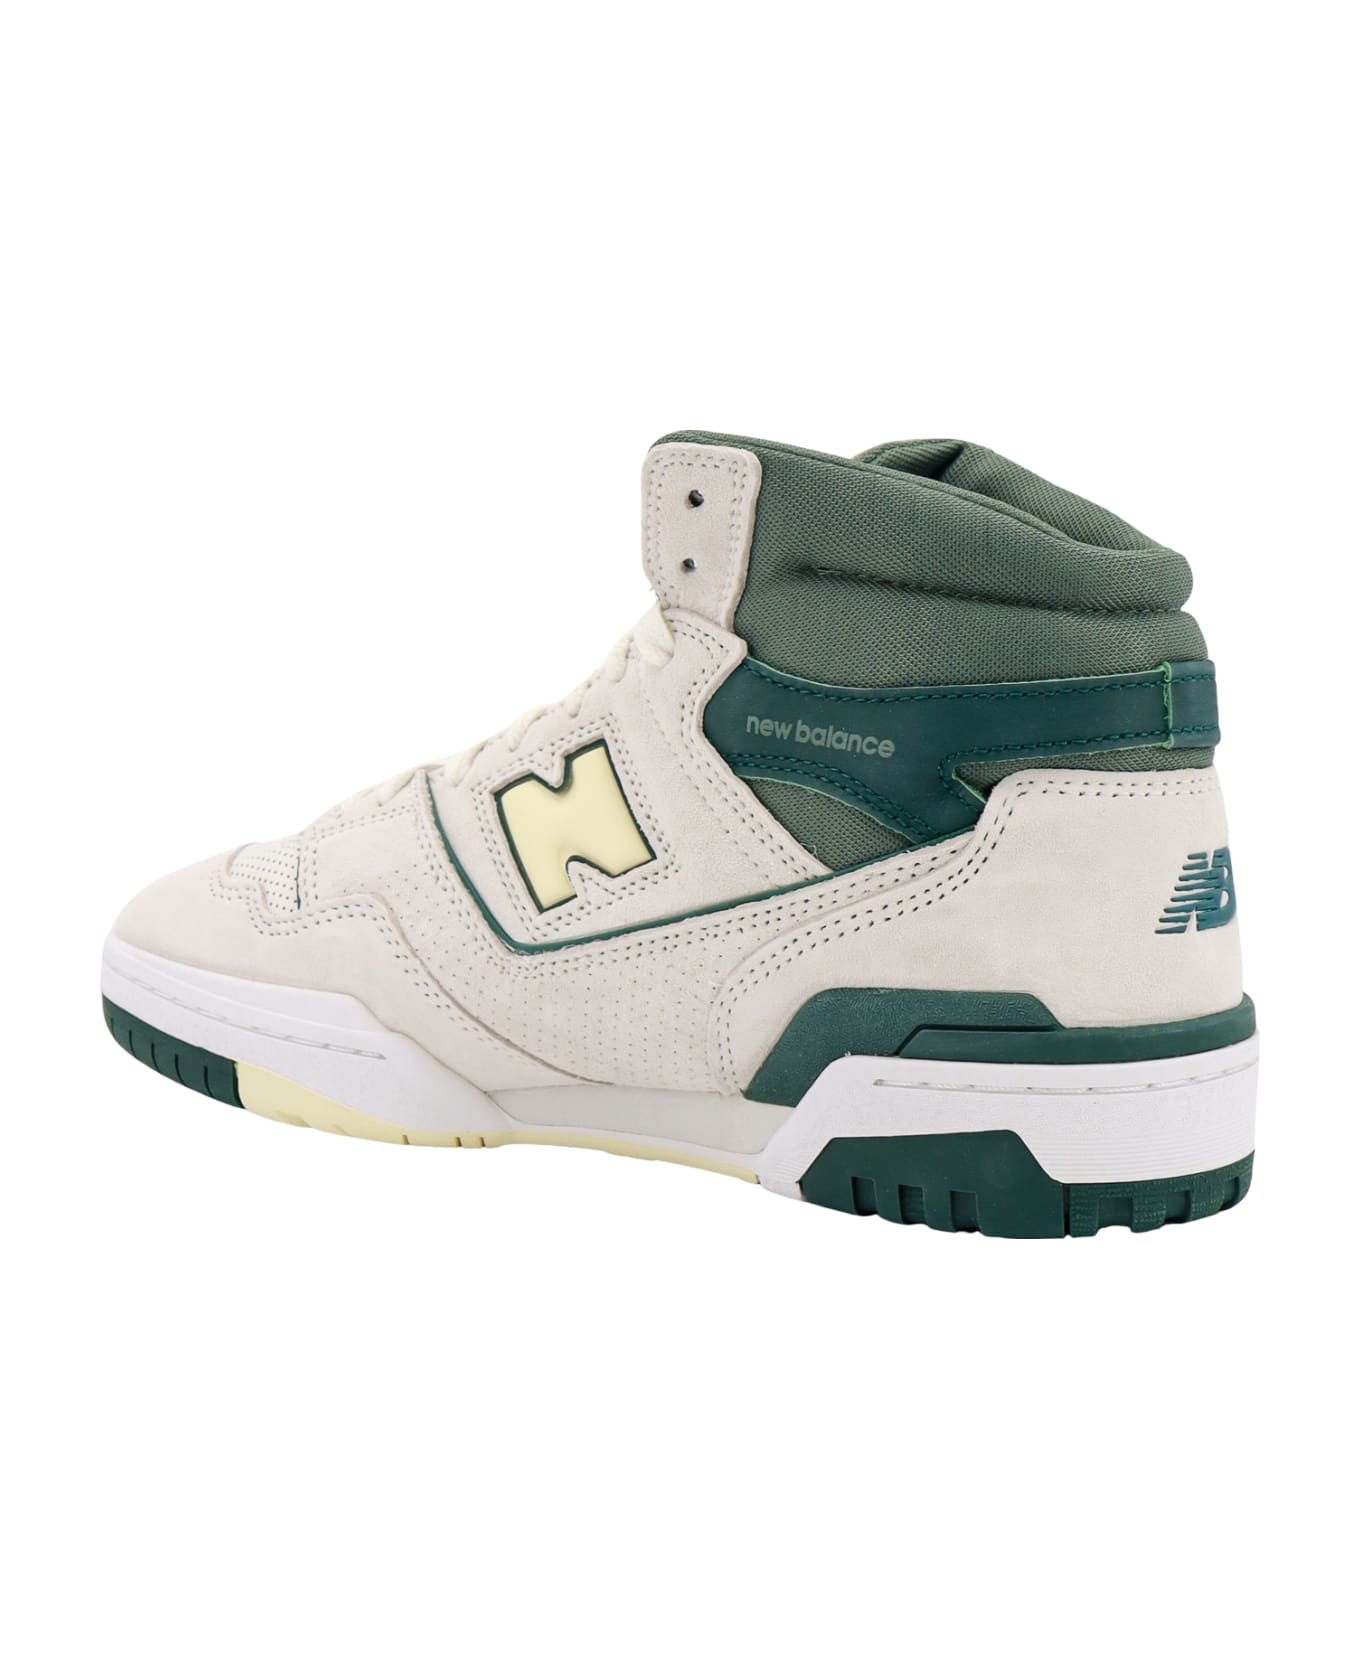 New Balance 650 Sneakers - Green